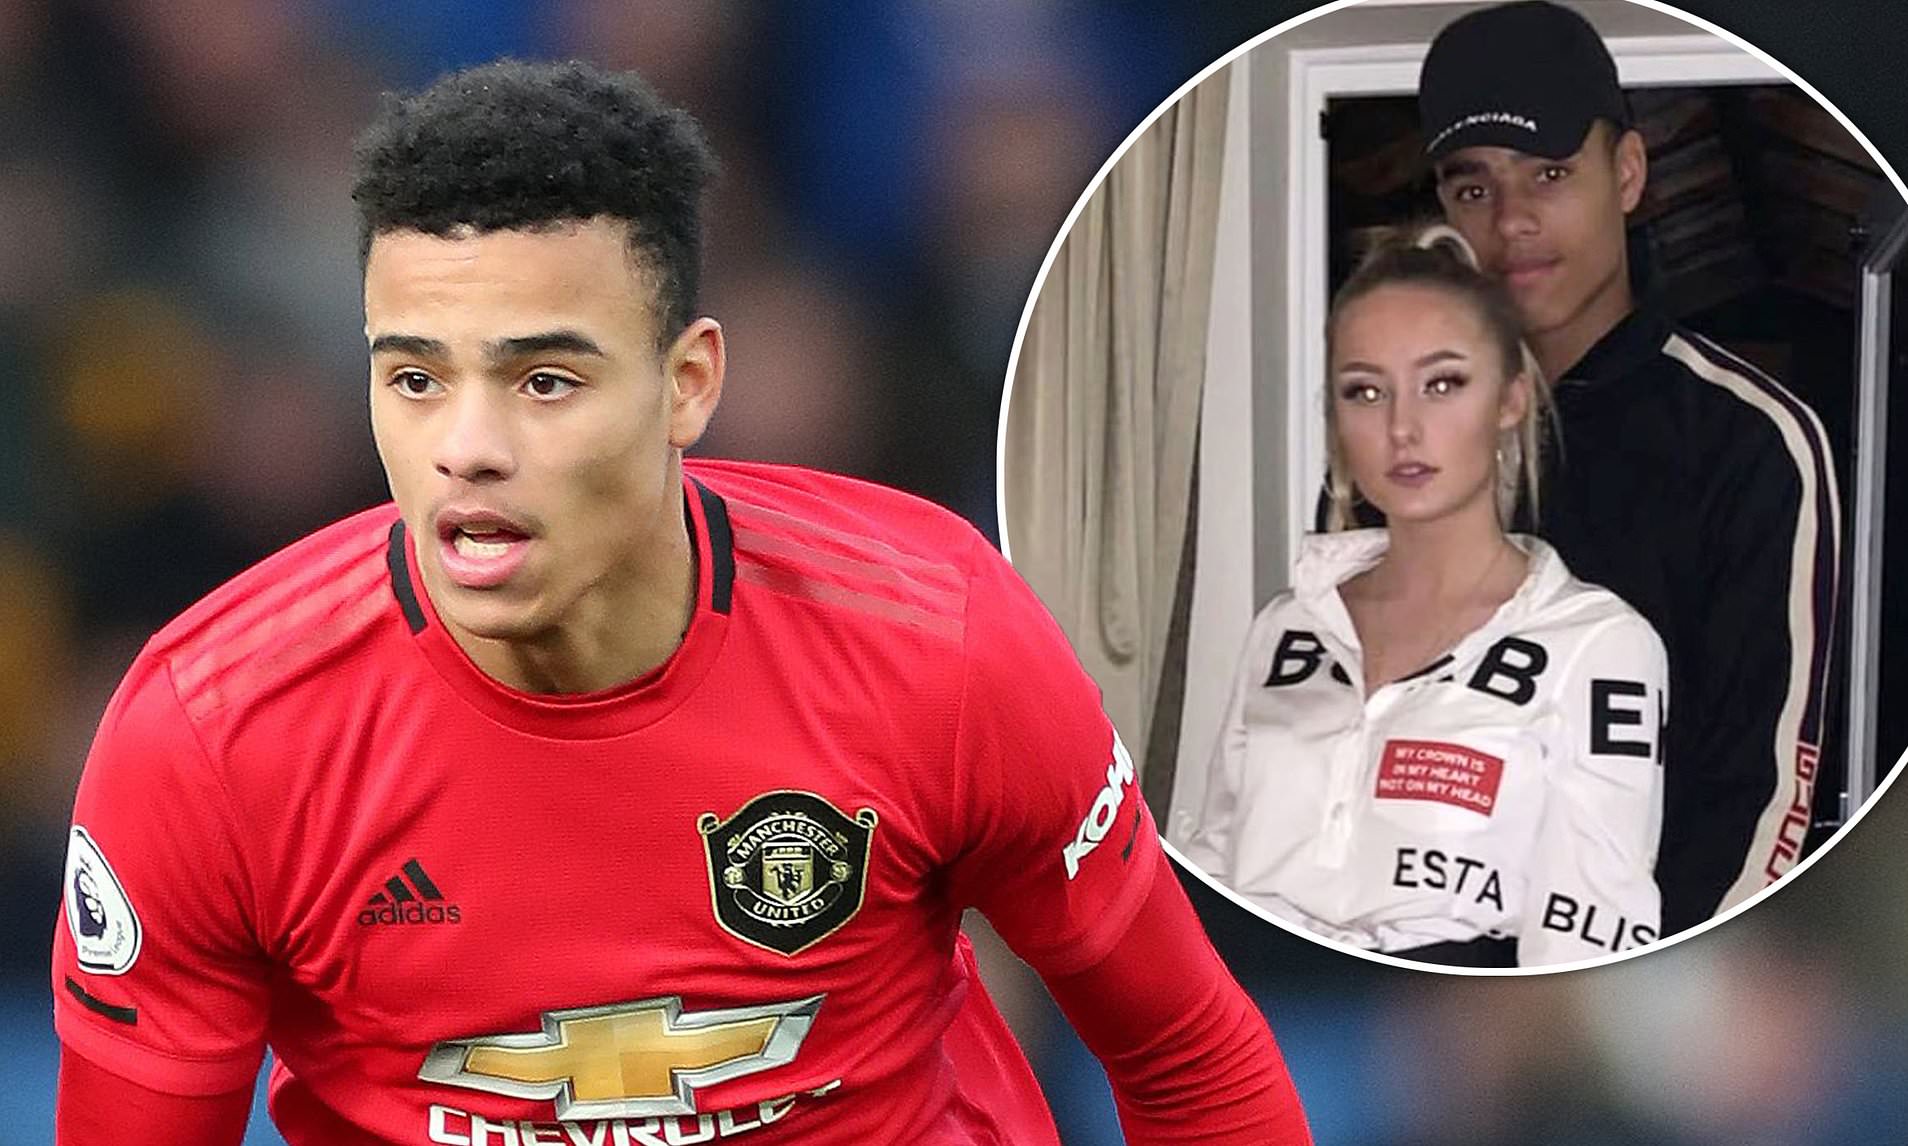 Man Utd player Mason Greenwood accused of physical violence and sexual abuse